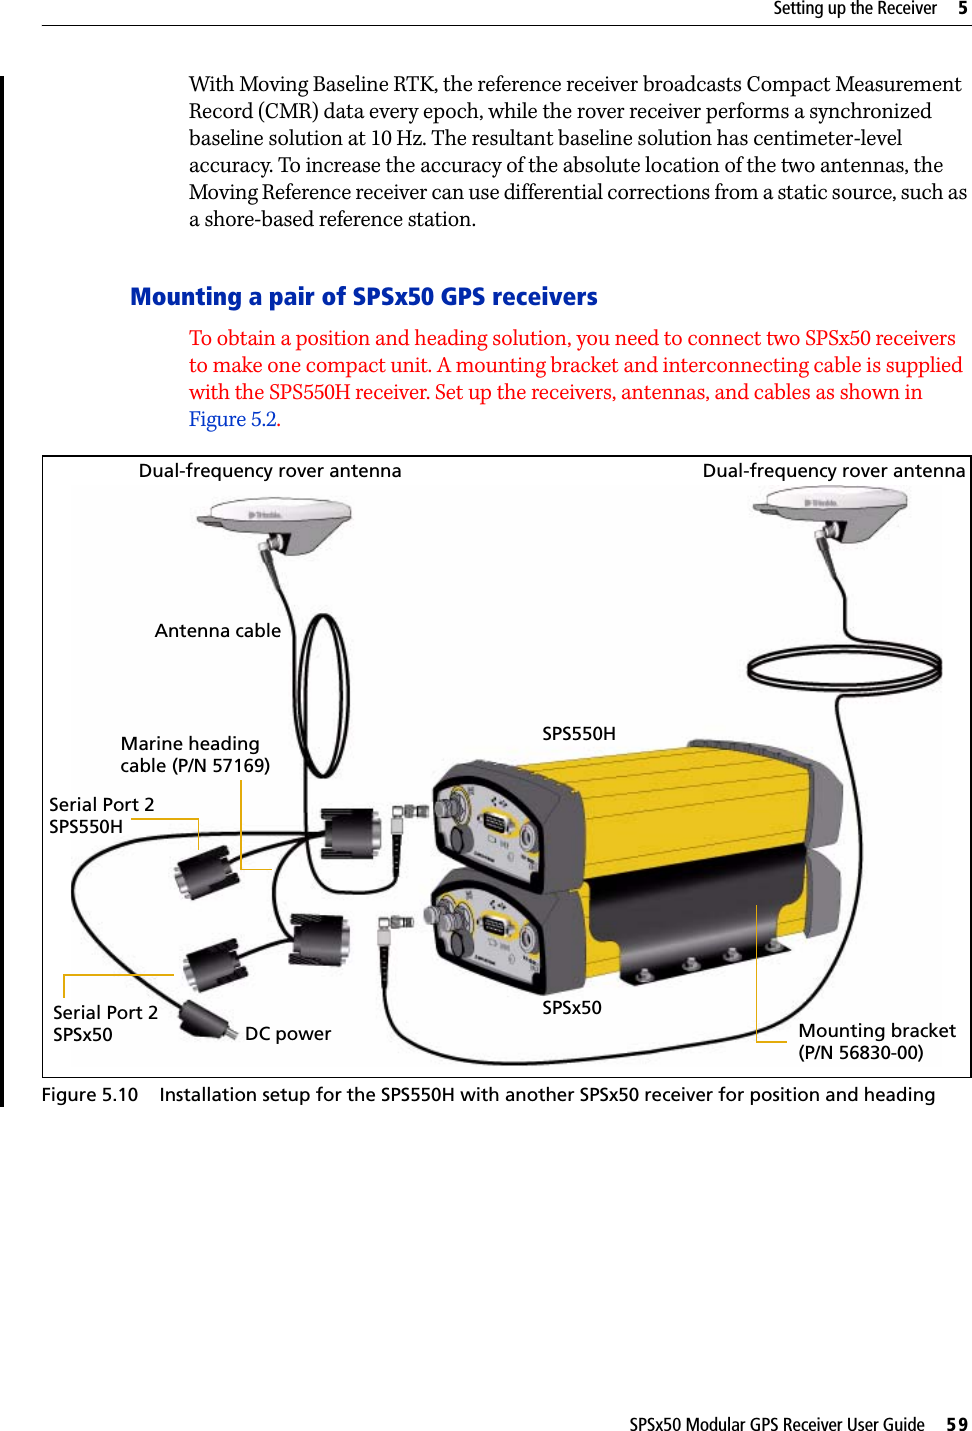 SPSx50 Modular GPS Receiver User Guide     59Setting up the Receiver     5With Moving Baseline RTK, the reference receiver broadcasts Compact Measurement Record (CMR) data every epoch, while the rover receiver performs a synchronized baseline solution at 10 Hz. The resultant baseline solution has centimeter-level accuracy. To increase the accuracy of the absolute location of the two antennas, the Moving Reference receiver can use differential corrections from a static source, such as a shore-based reference station.Mounting a pair of SPSx50 GPS receiversTo obtain a position and heading solution, you need to connect two SPSx50 receivers to make one compact unit. A mounting bracket and interconnecting cable is supplied with the SPS550H receiver. Set up the receivers, antennas, and cables as shown in Figure 5.2. Figure 5.10 Installation setup for the SPS550H with another SPSx50 receiver for position and headingDual-frequency rover antenna Dual-frequency rover antennaSPS550HSPSx50Antenna cableMarine headingcable (P/N 57169)Serial Port 2SPS550HSerial Port 2SPSx50 DC power Mounting bracket(P/N 56830-00)